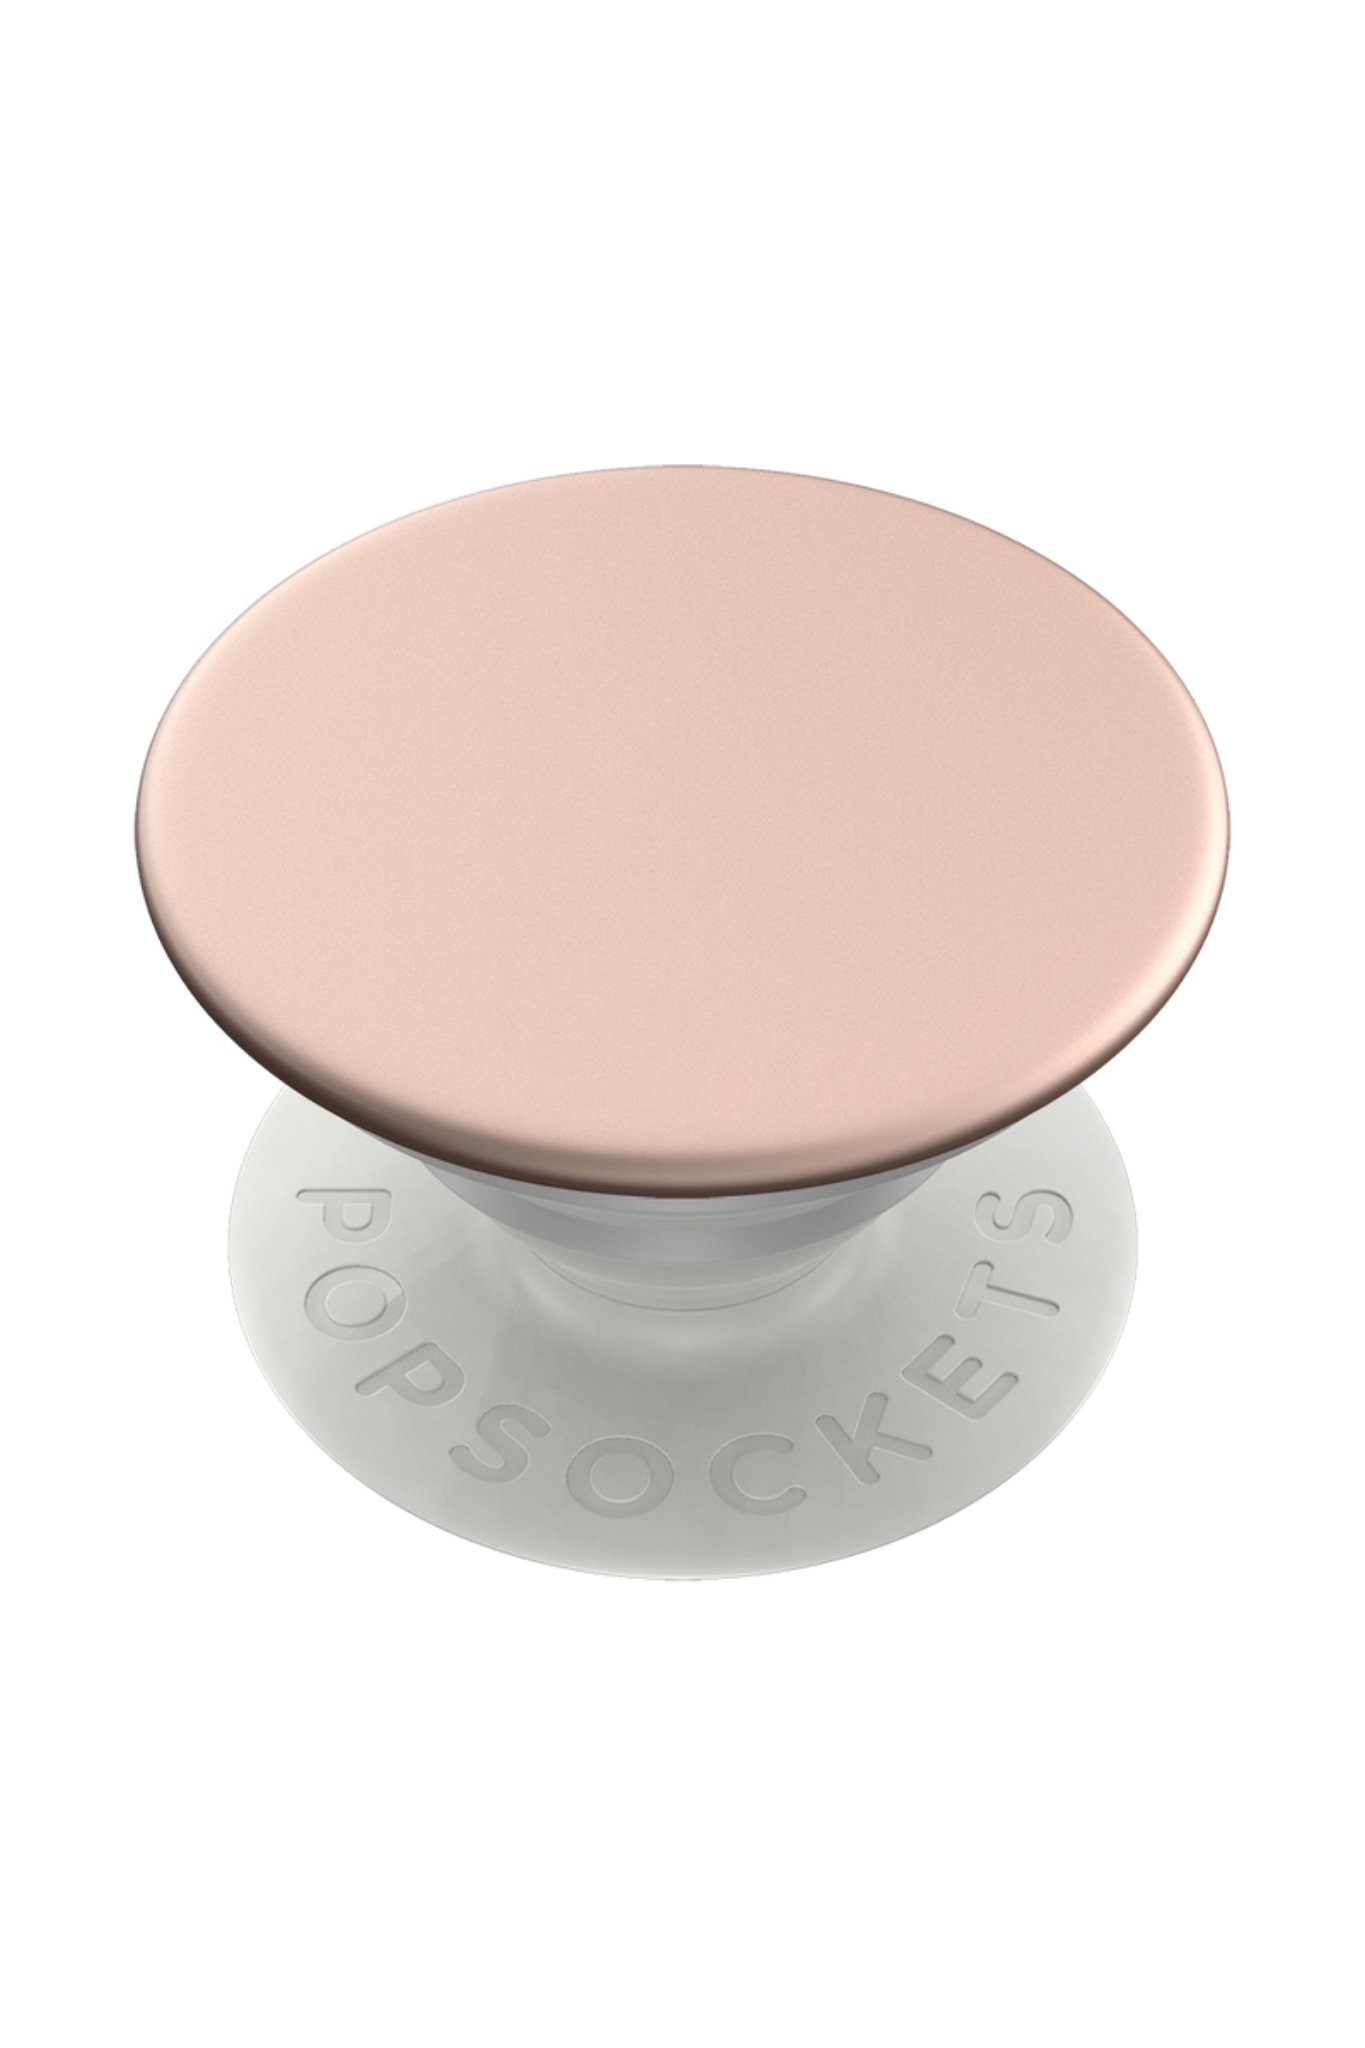 View 1 of PopSockets Rose Gold Aluminum, a Gifts from Larrea Cove. Detail: 

<div clas...